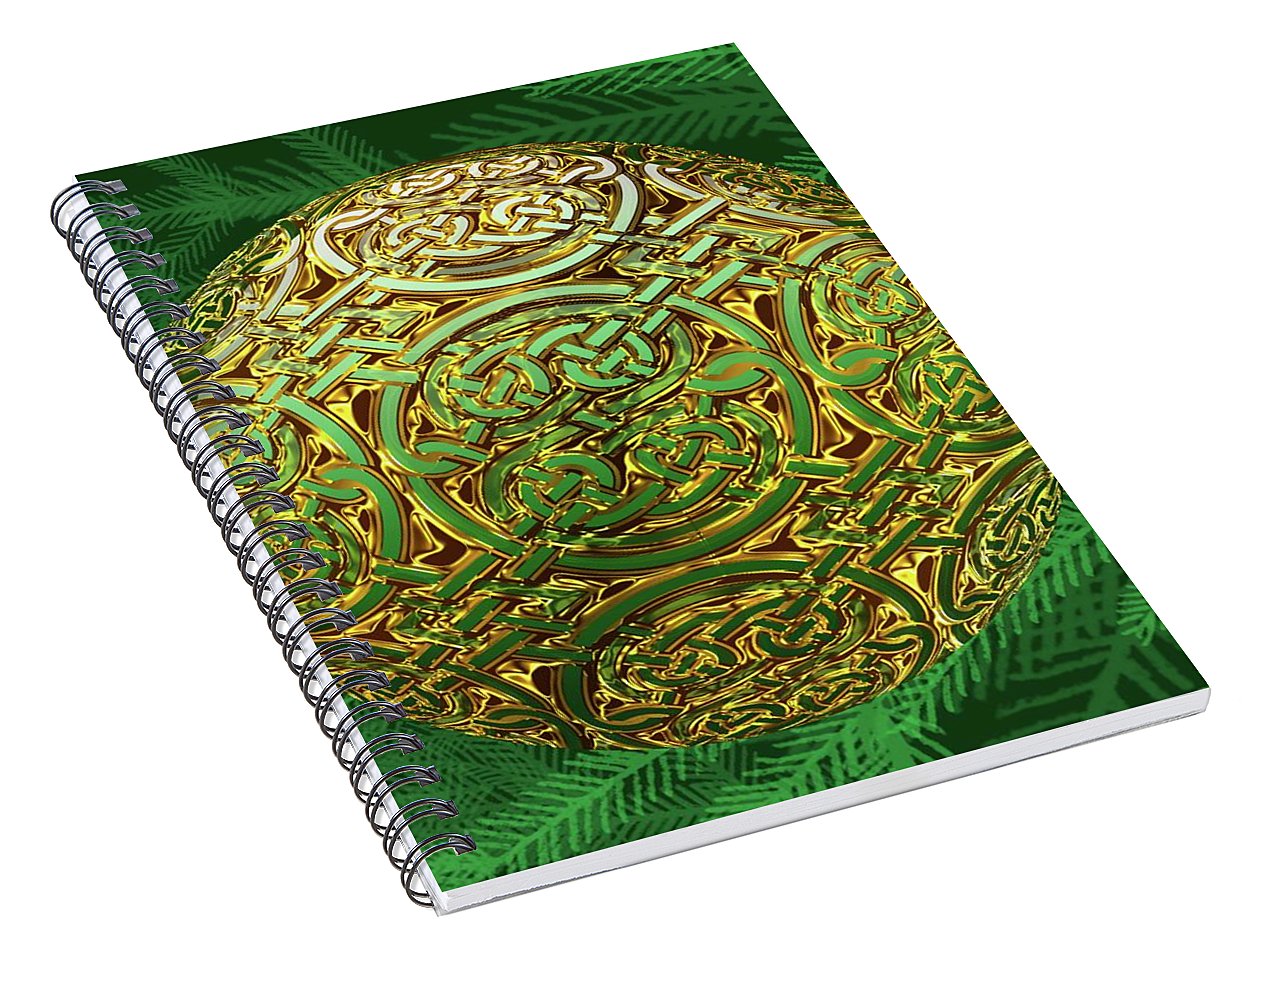 Gold Celtic Christmas Ornament - Spiral Notebook